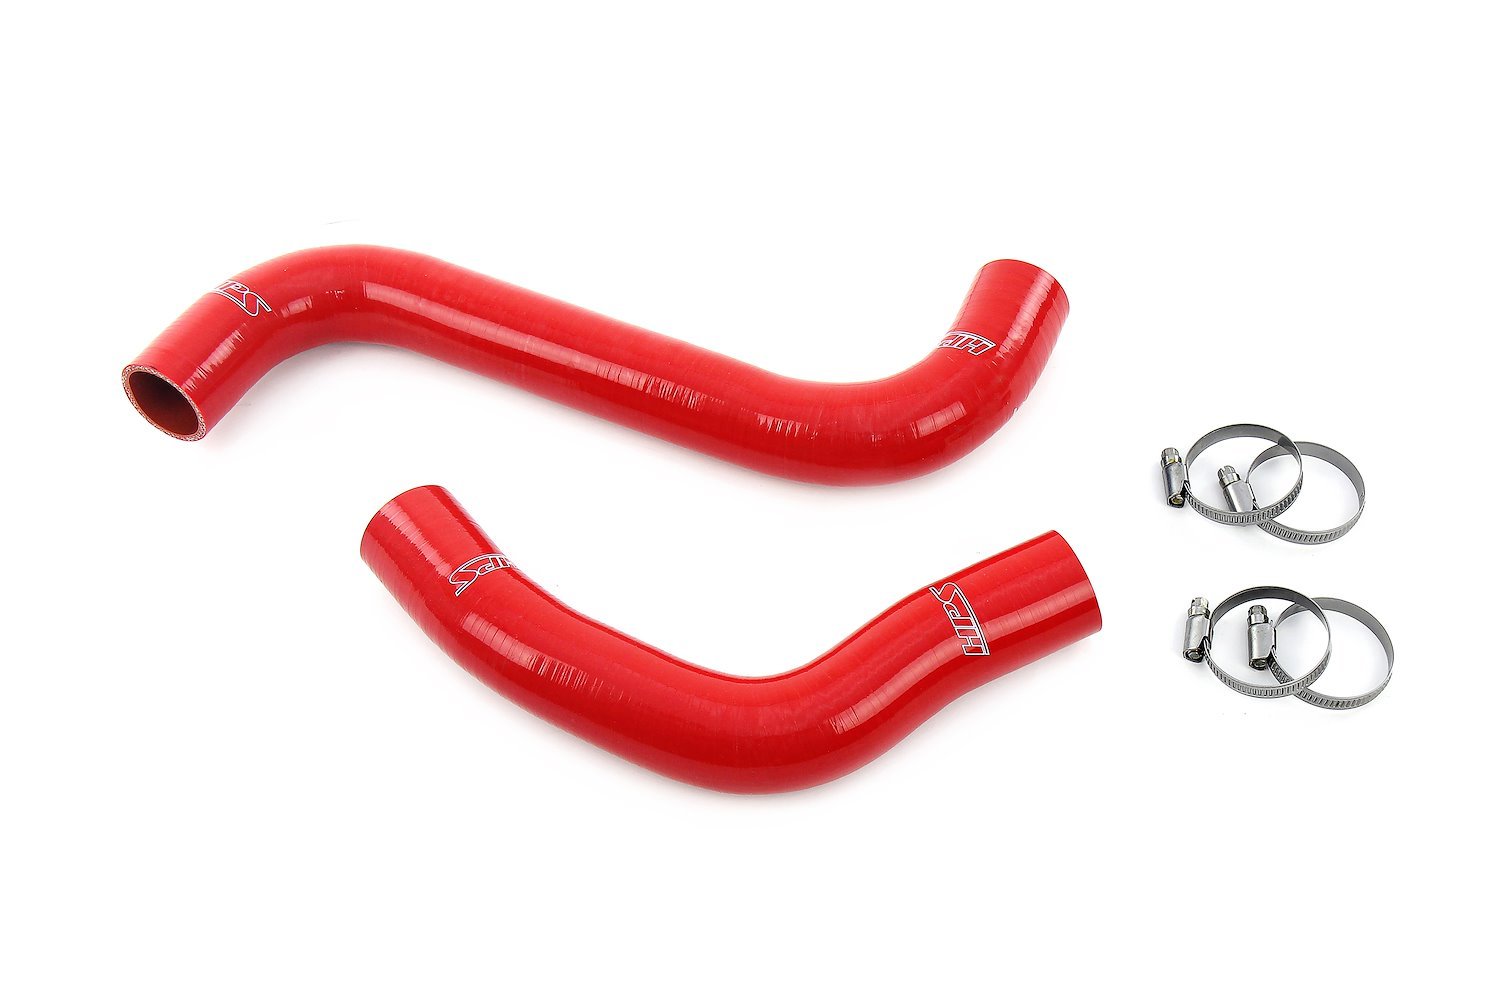 57-2107-RED Radiator Hose Kit, 3-Ply Reinforced Silicone, Replaces Rubber Radiator Coolant Hoses